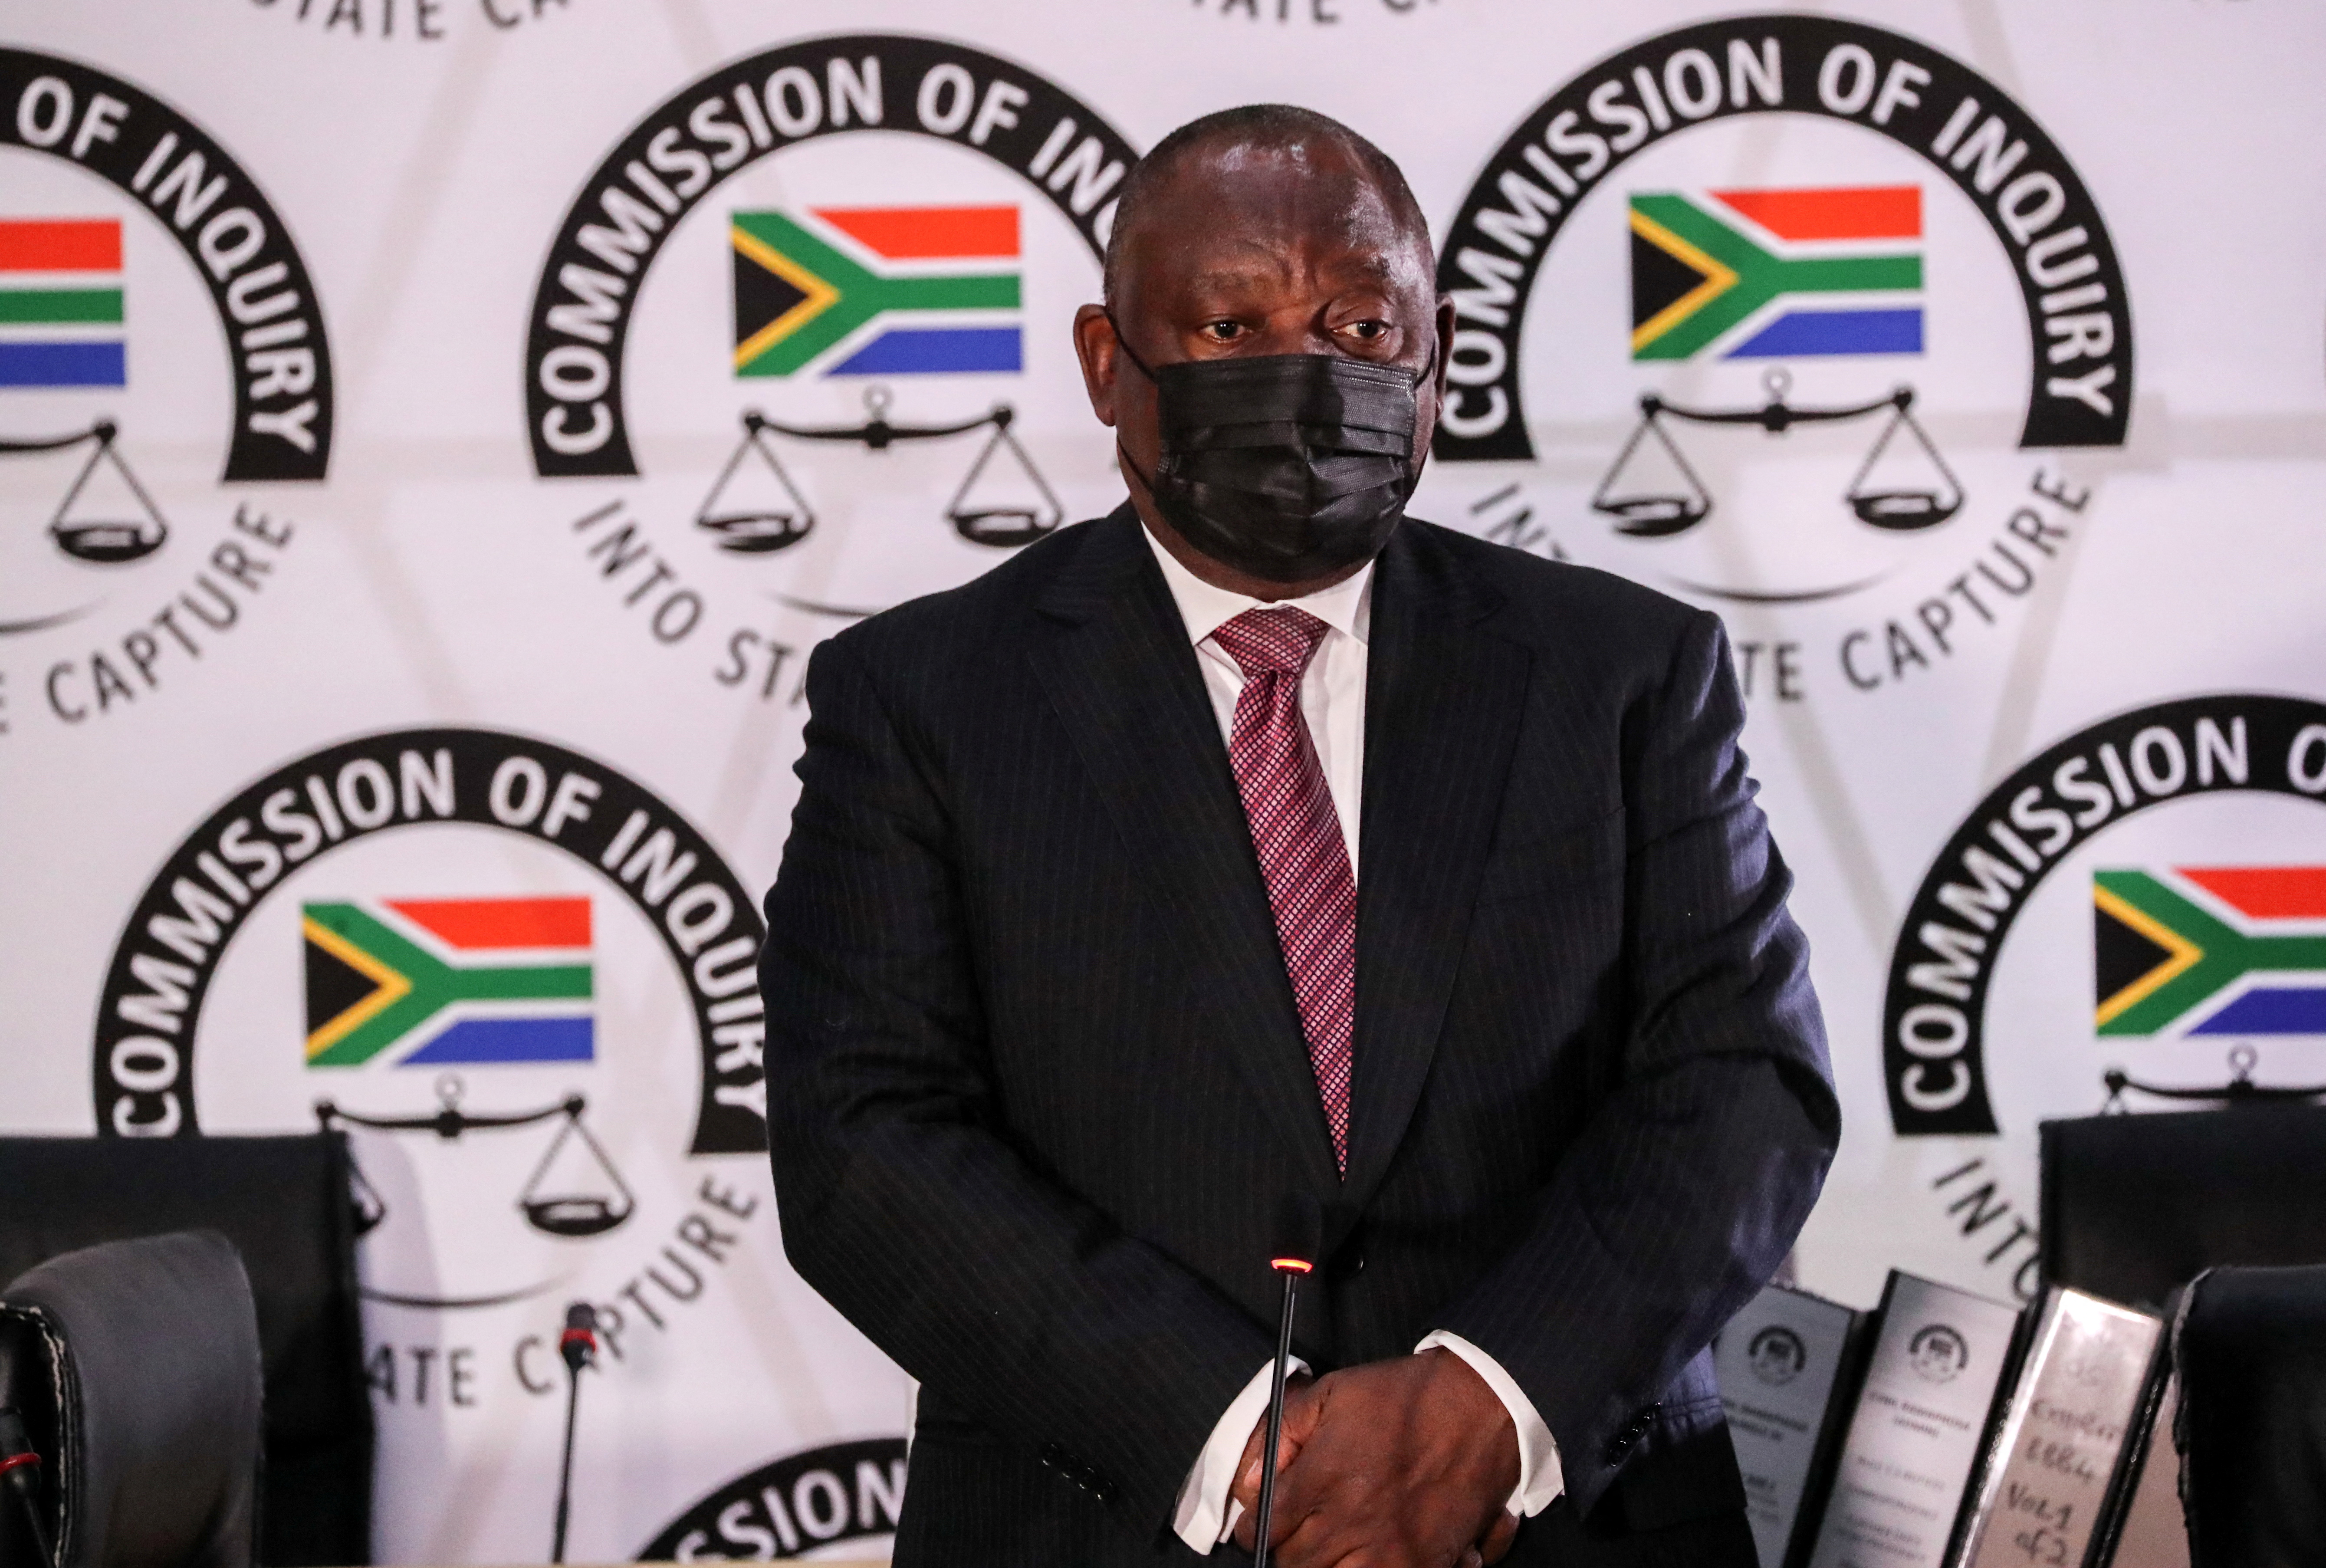 South African President Cyril Ramaphosa appears to testify before the Zondo Commission of Inquiry into State Capture in Johannesburg